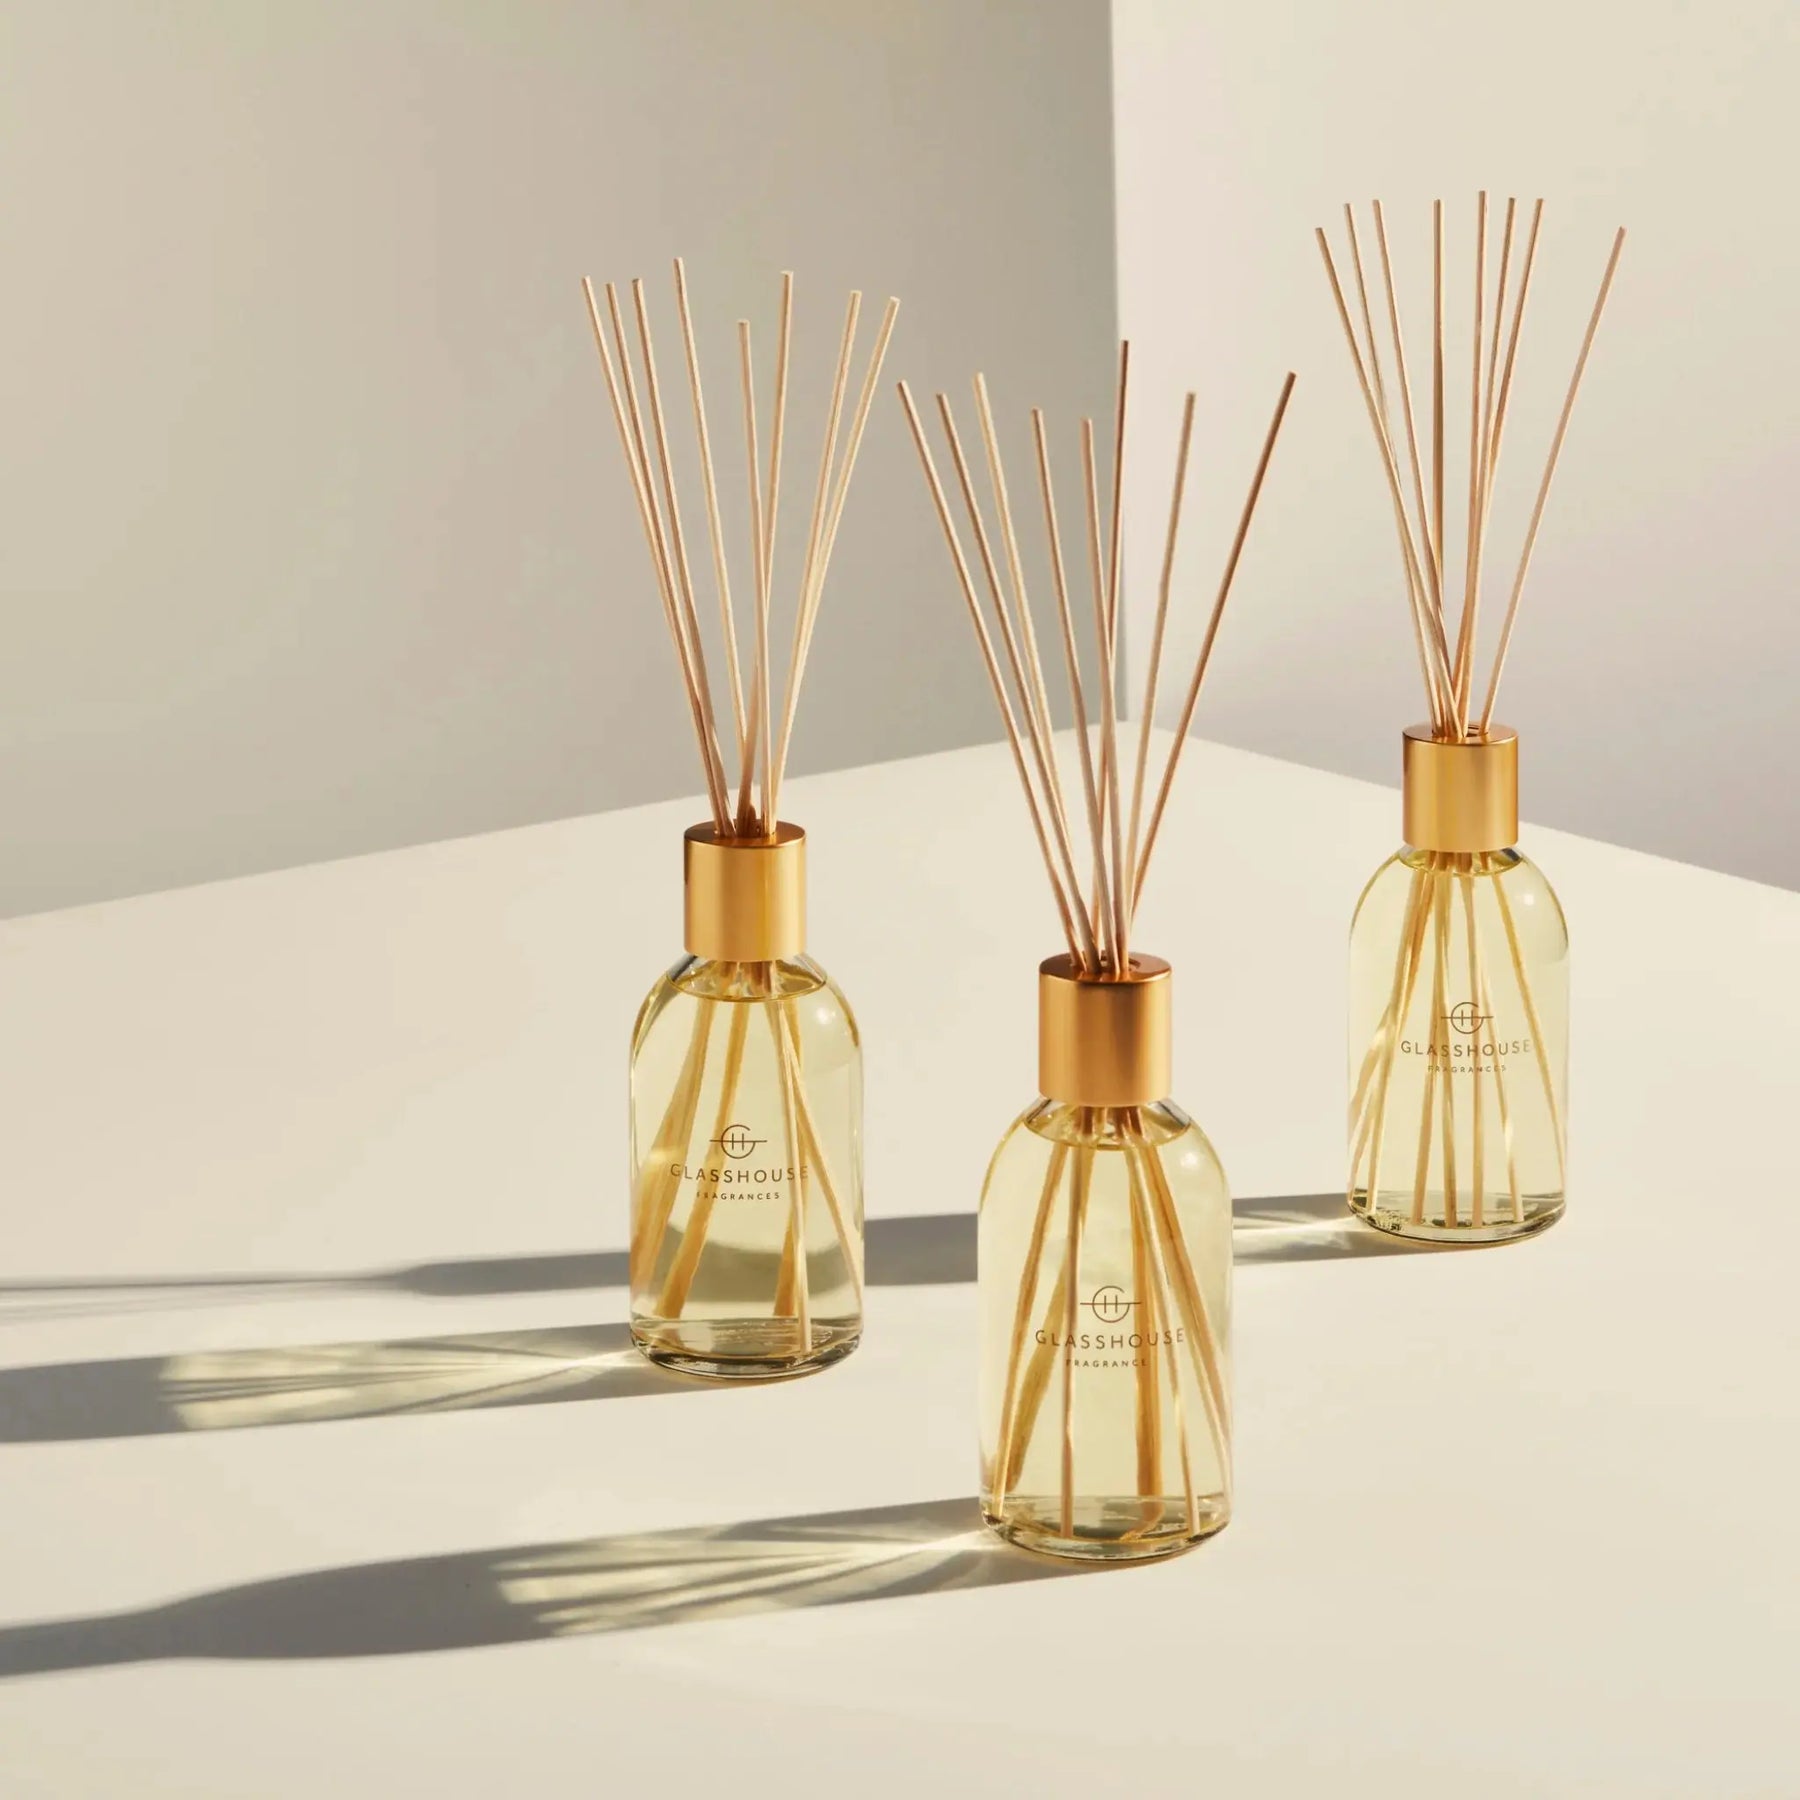 Three Glasshouse Fragrances Diffuser in a room